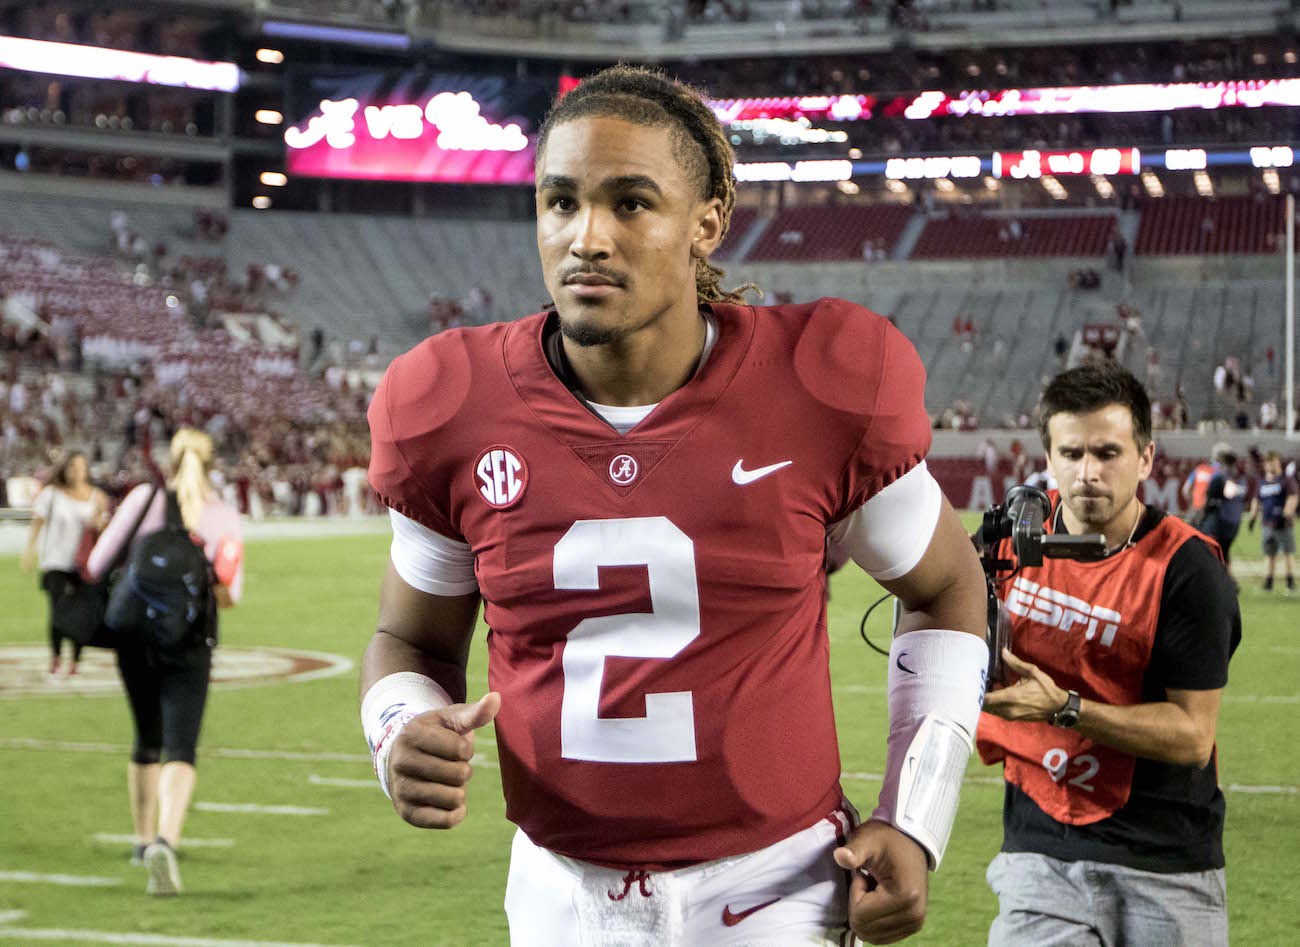 LOOK: Jalen Hurts shows off new haircut ahead of start of summer practices.